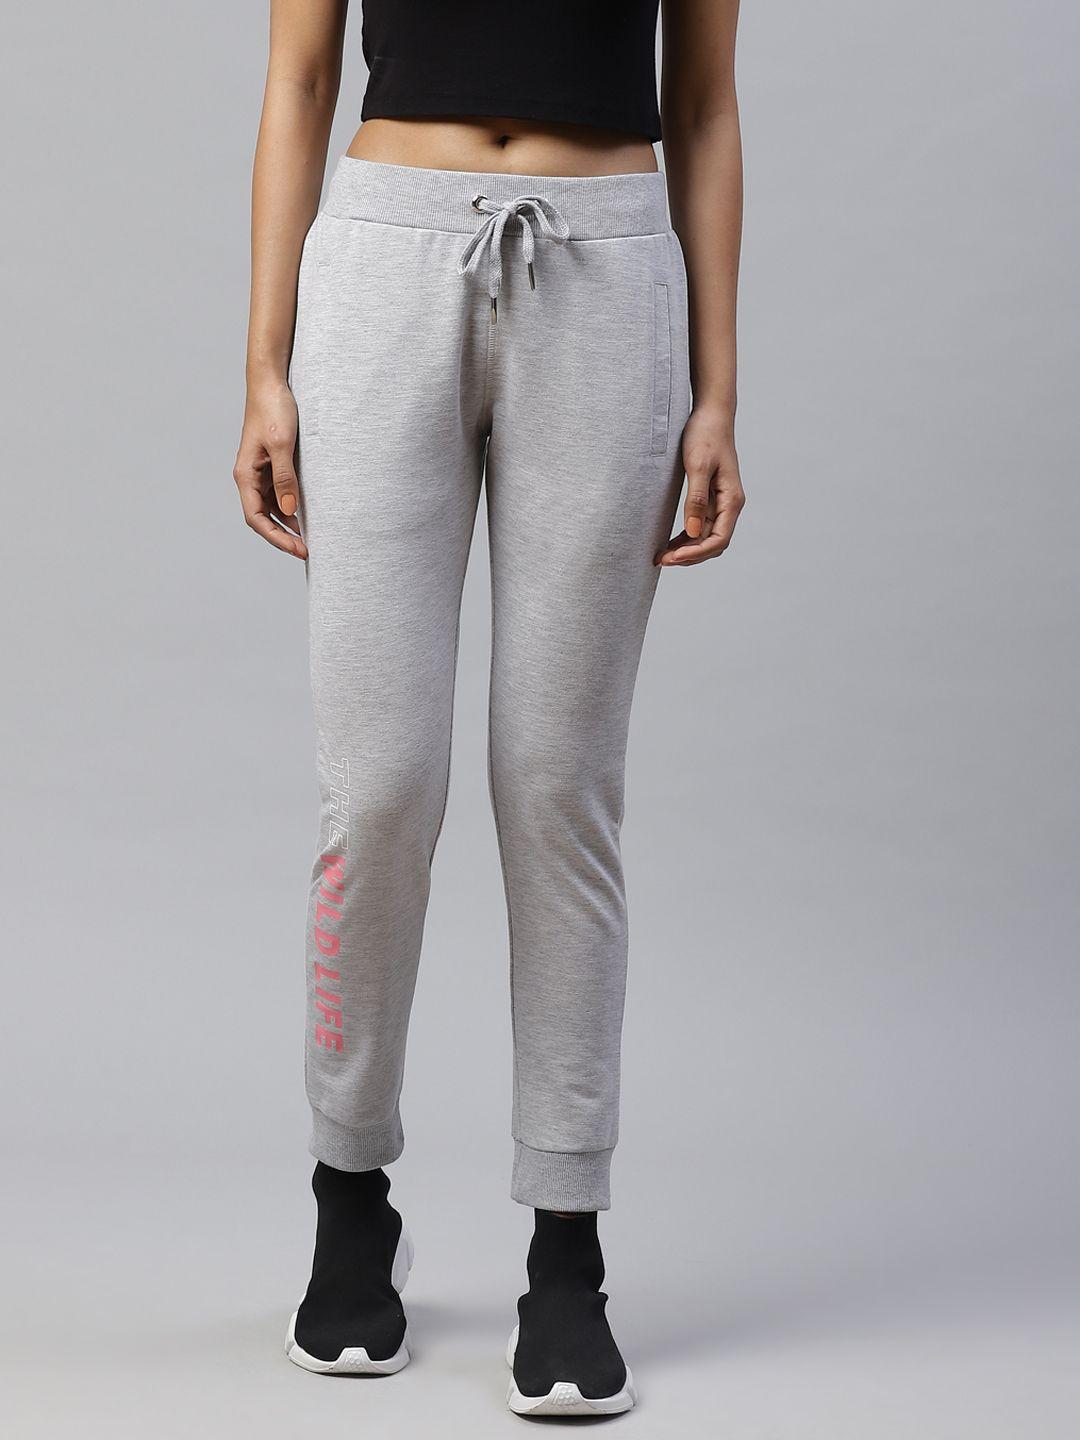 m7 by metronaut women grey melange slim fit solid joggers with printed detail